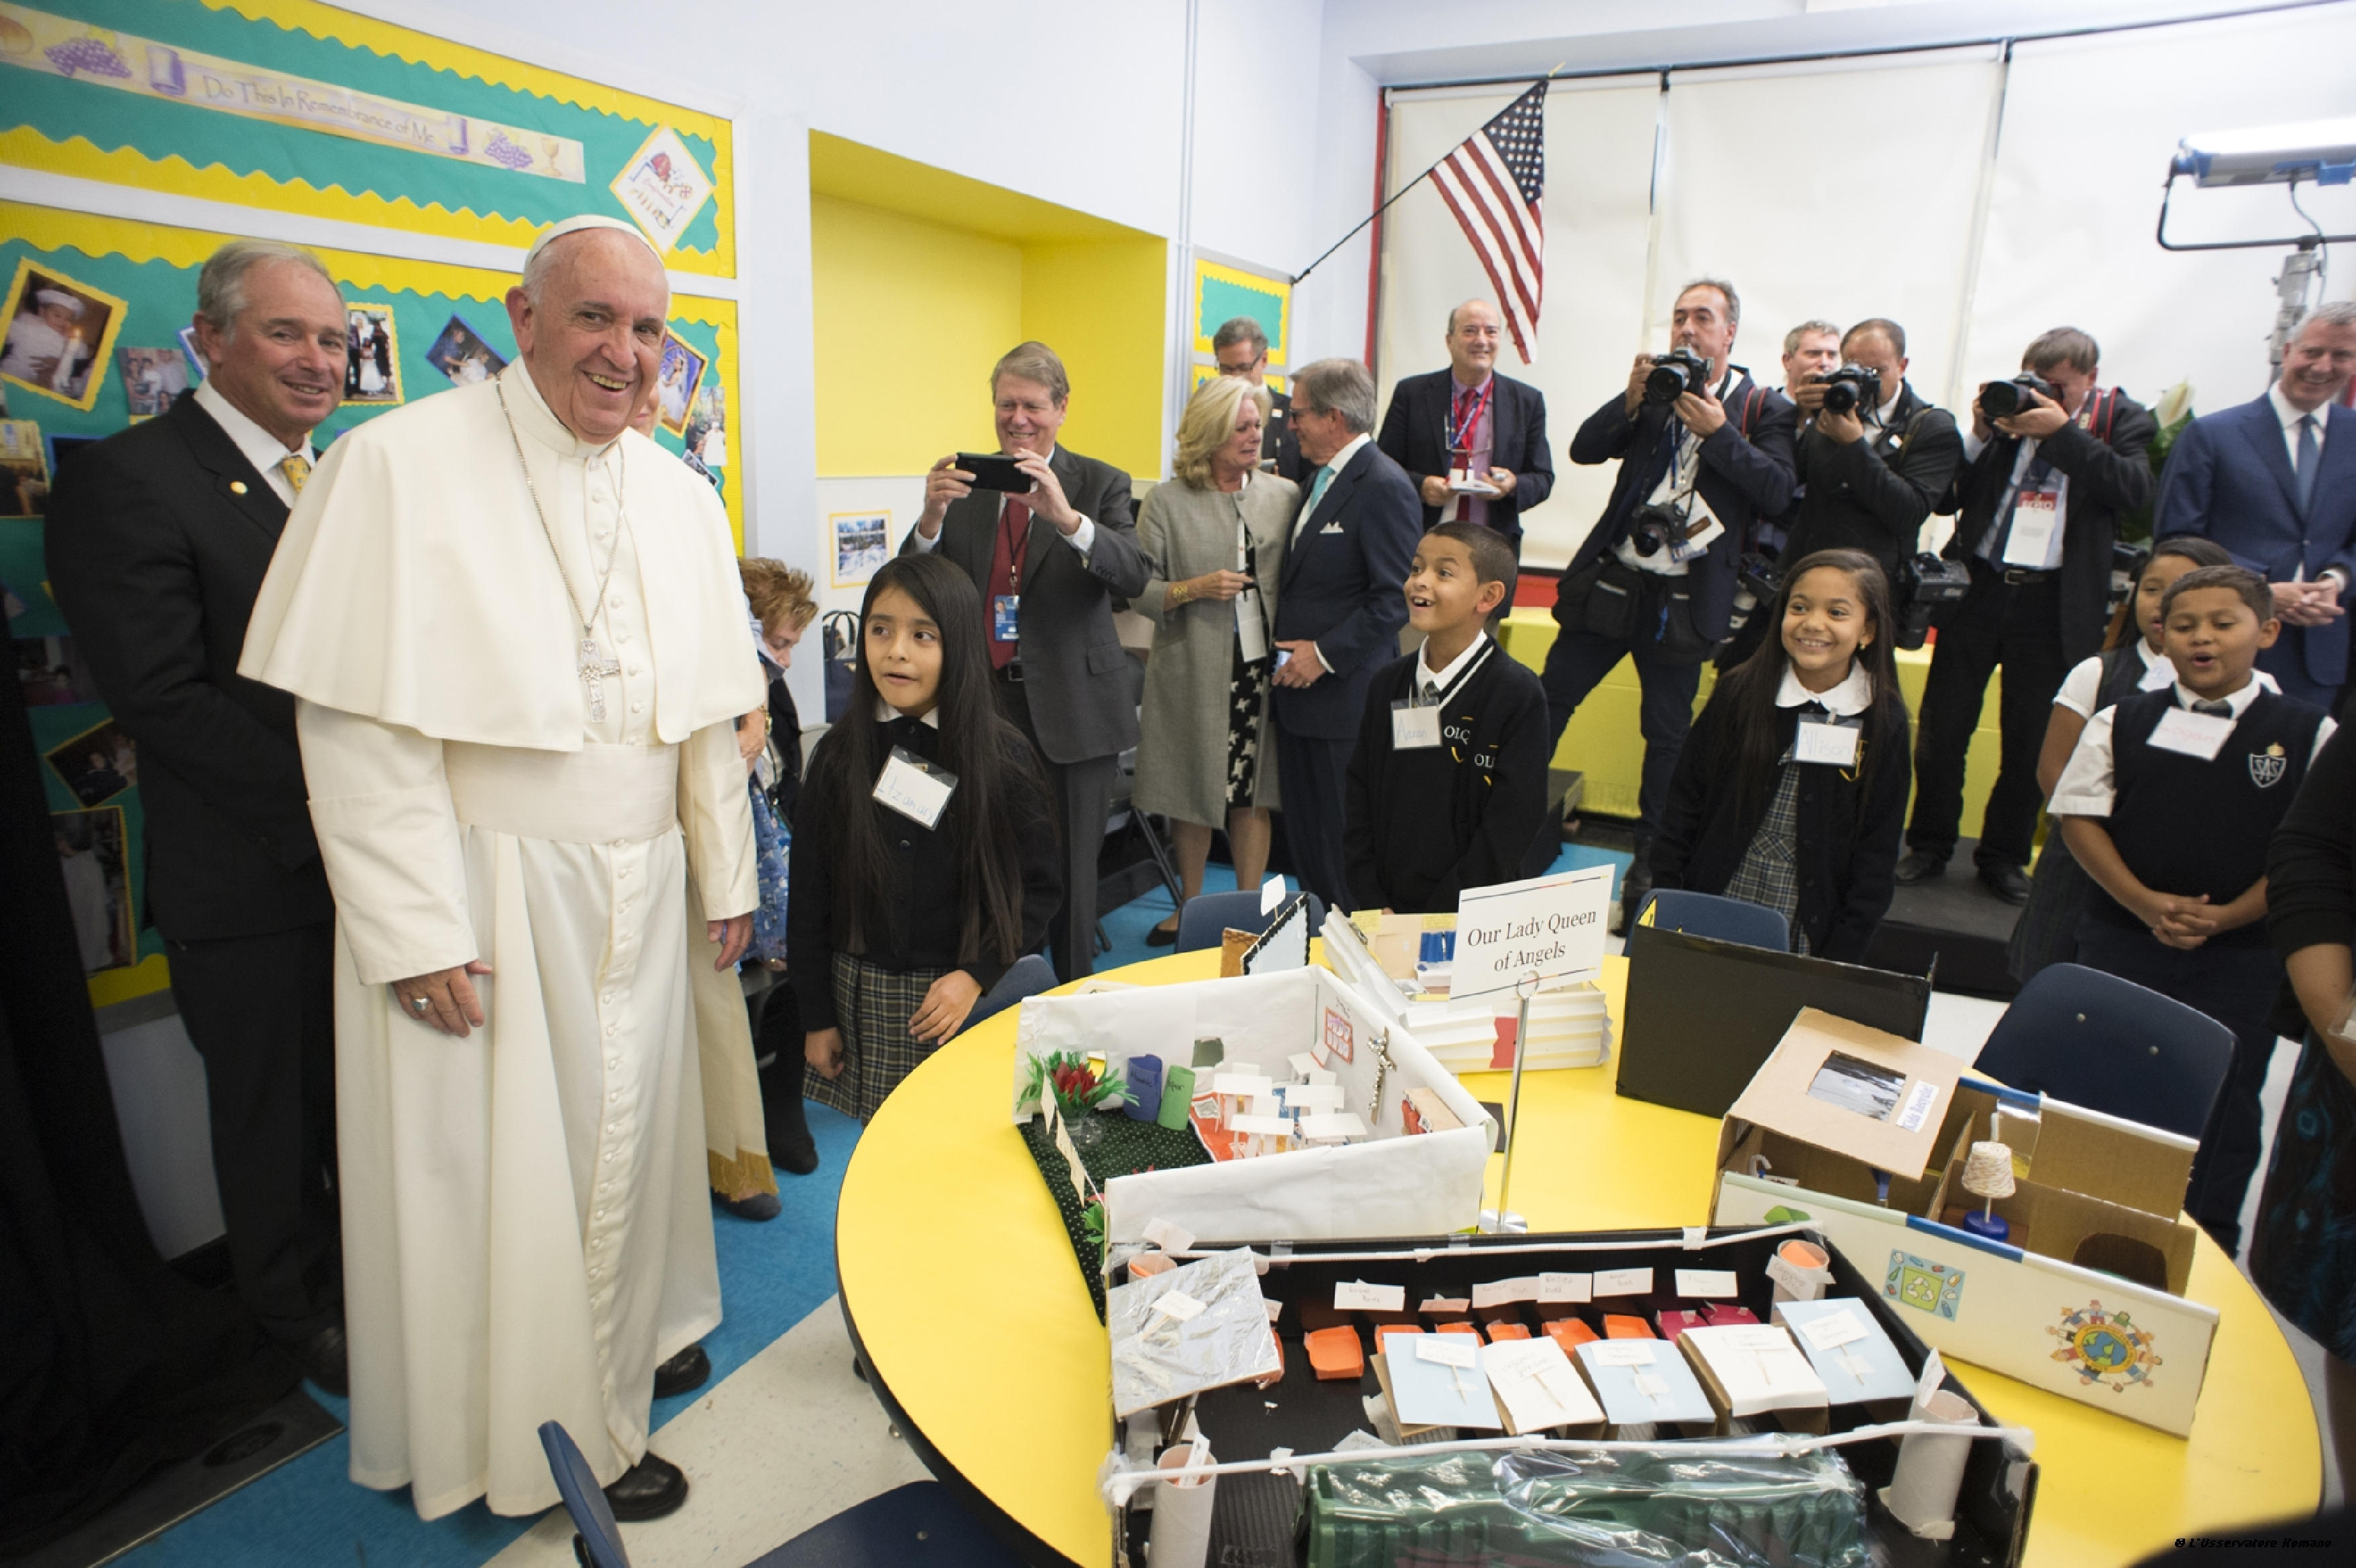 Pope Francis during his visit at Our Lady Queen of Angels School